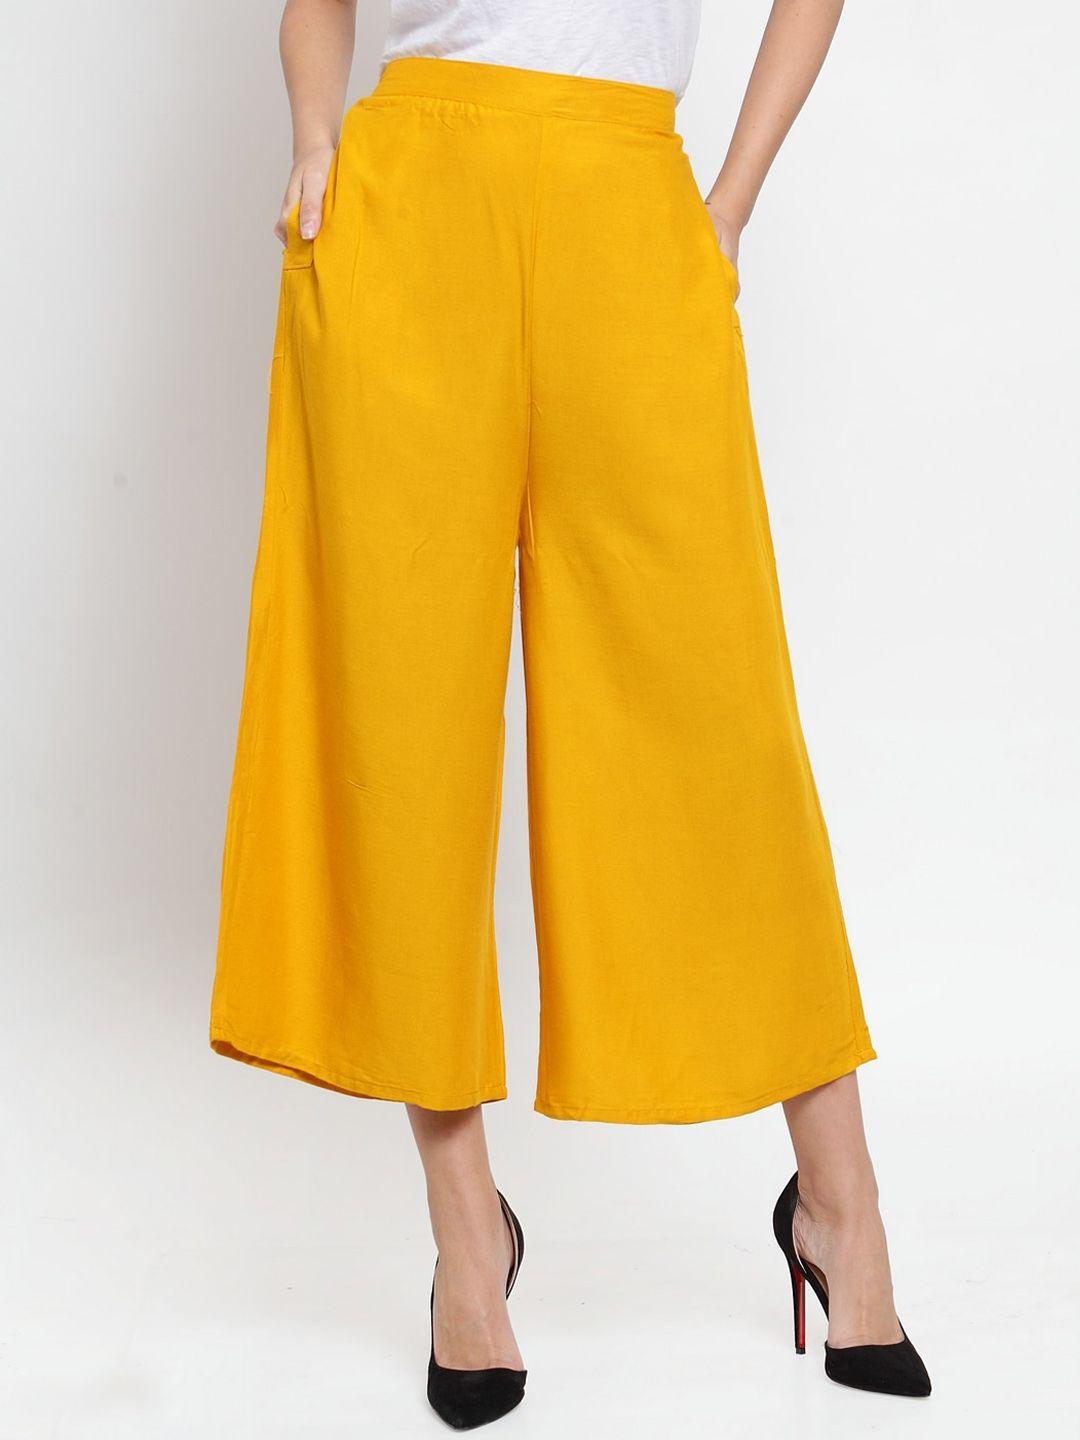 clora creation women smart easy wash culottes formal trousers